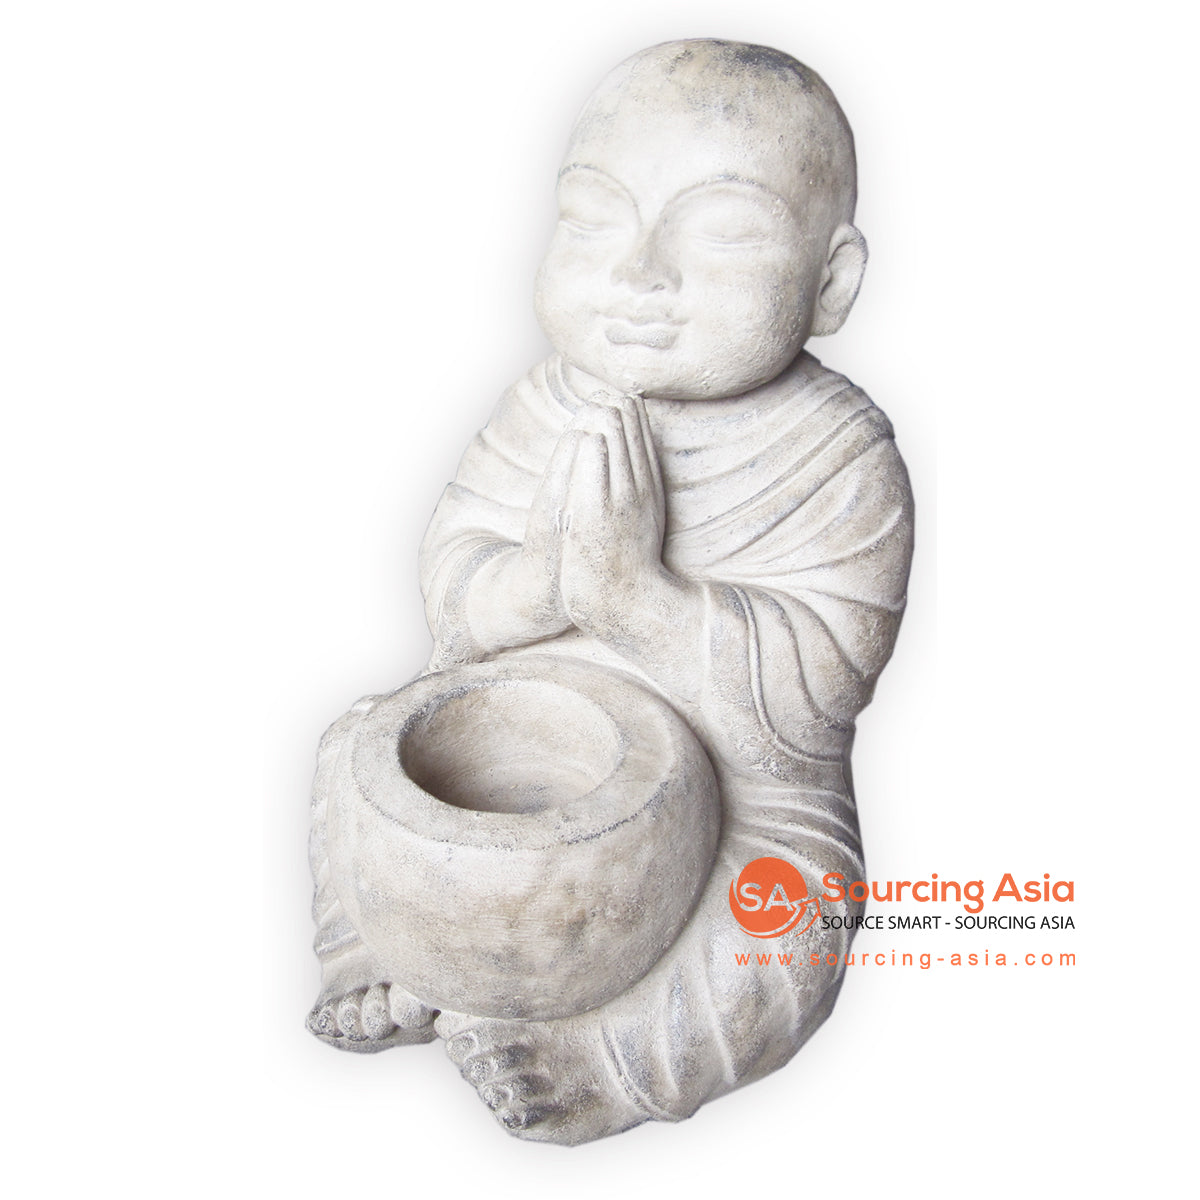 MHB194 STONE SITTING MONK STATUE WITH BOWL